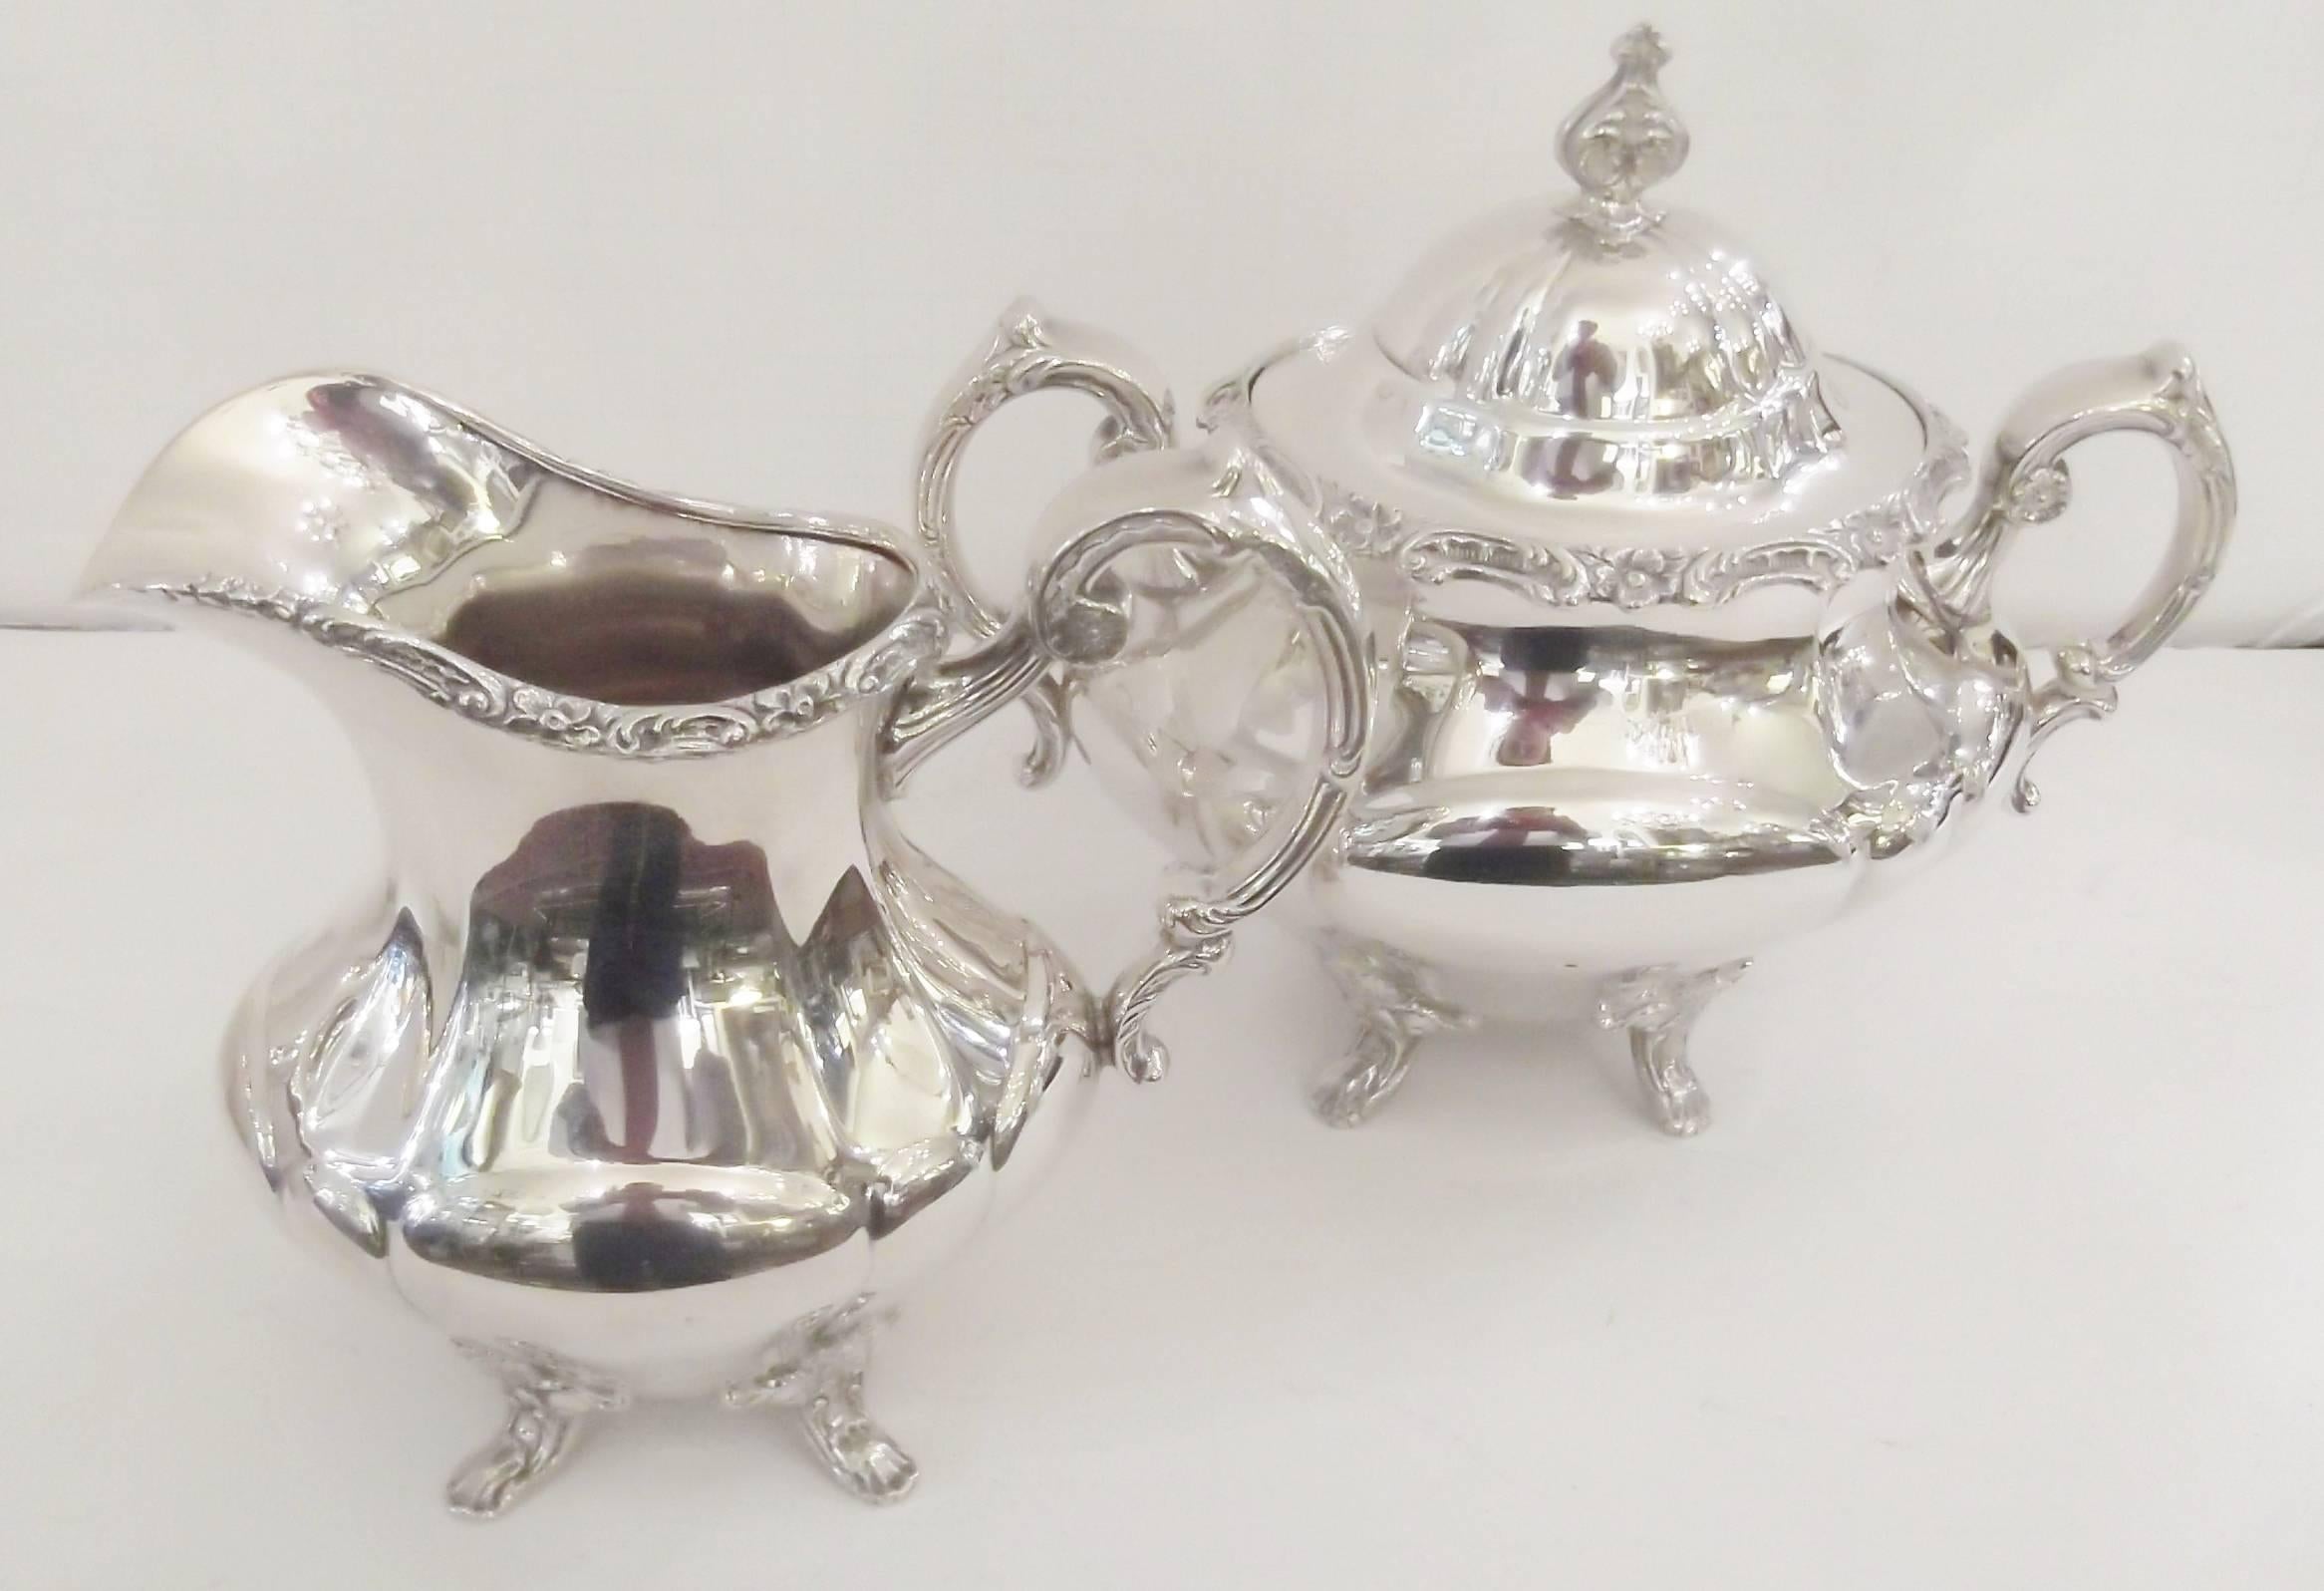 20th Century Sterling Silver Reed and Barton Tea Set